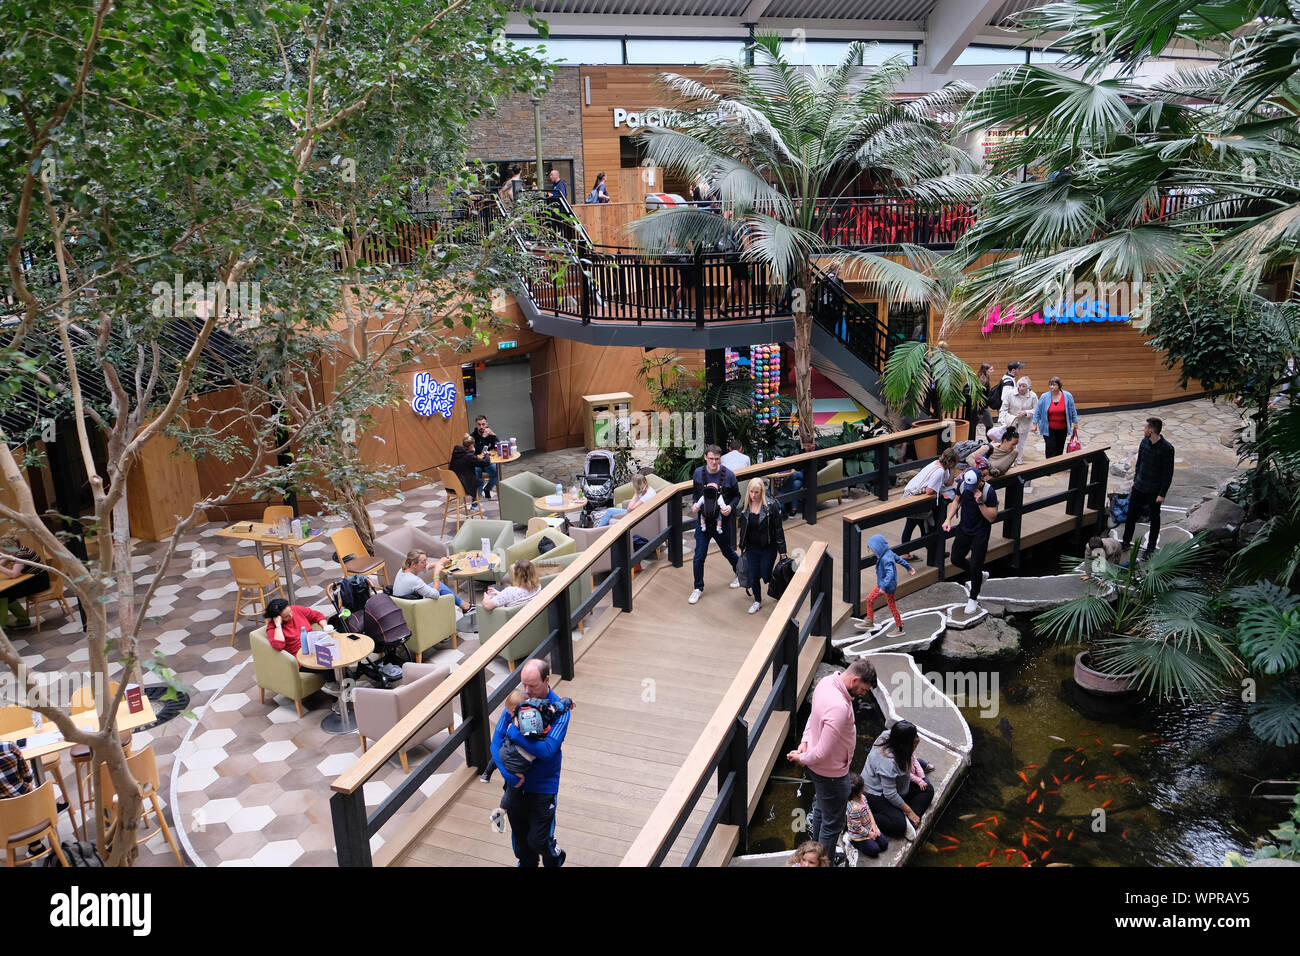 September 2019. Families at the main square area of The Plaza shopping center at Center Parcs Longleat Forest, Wiltshire, UK Stock Photo